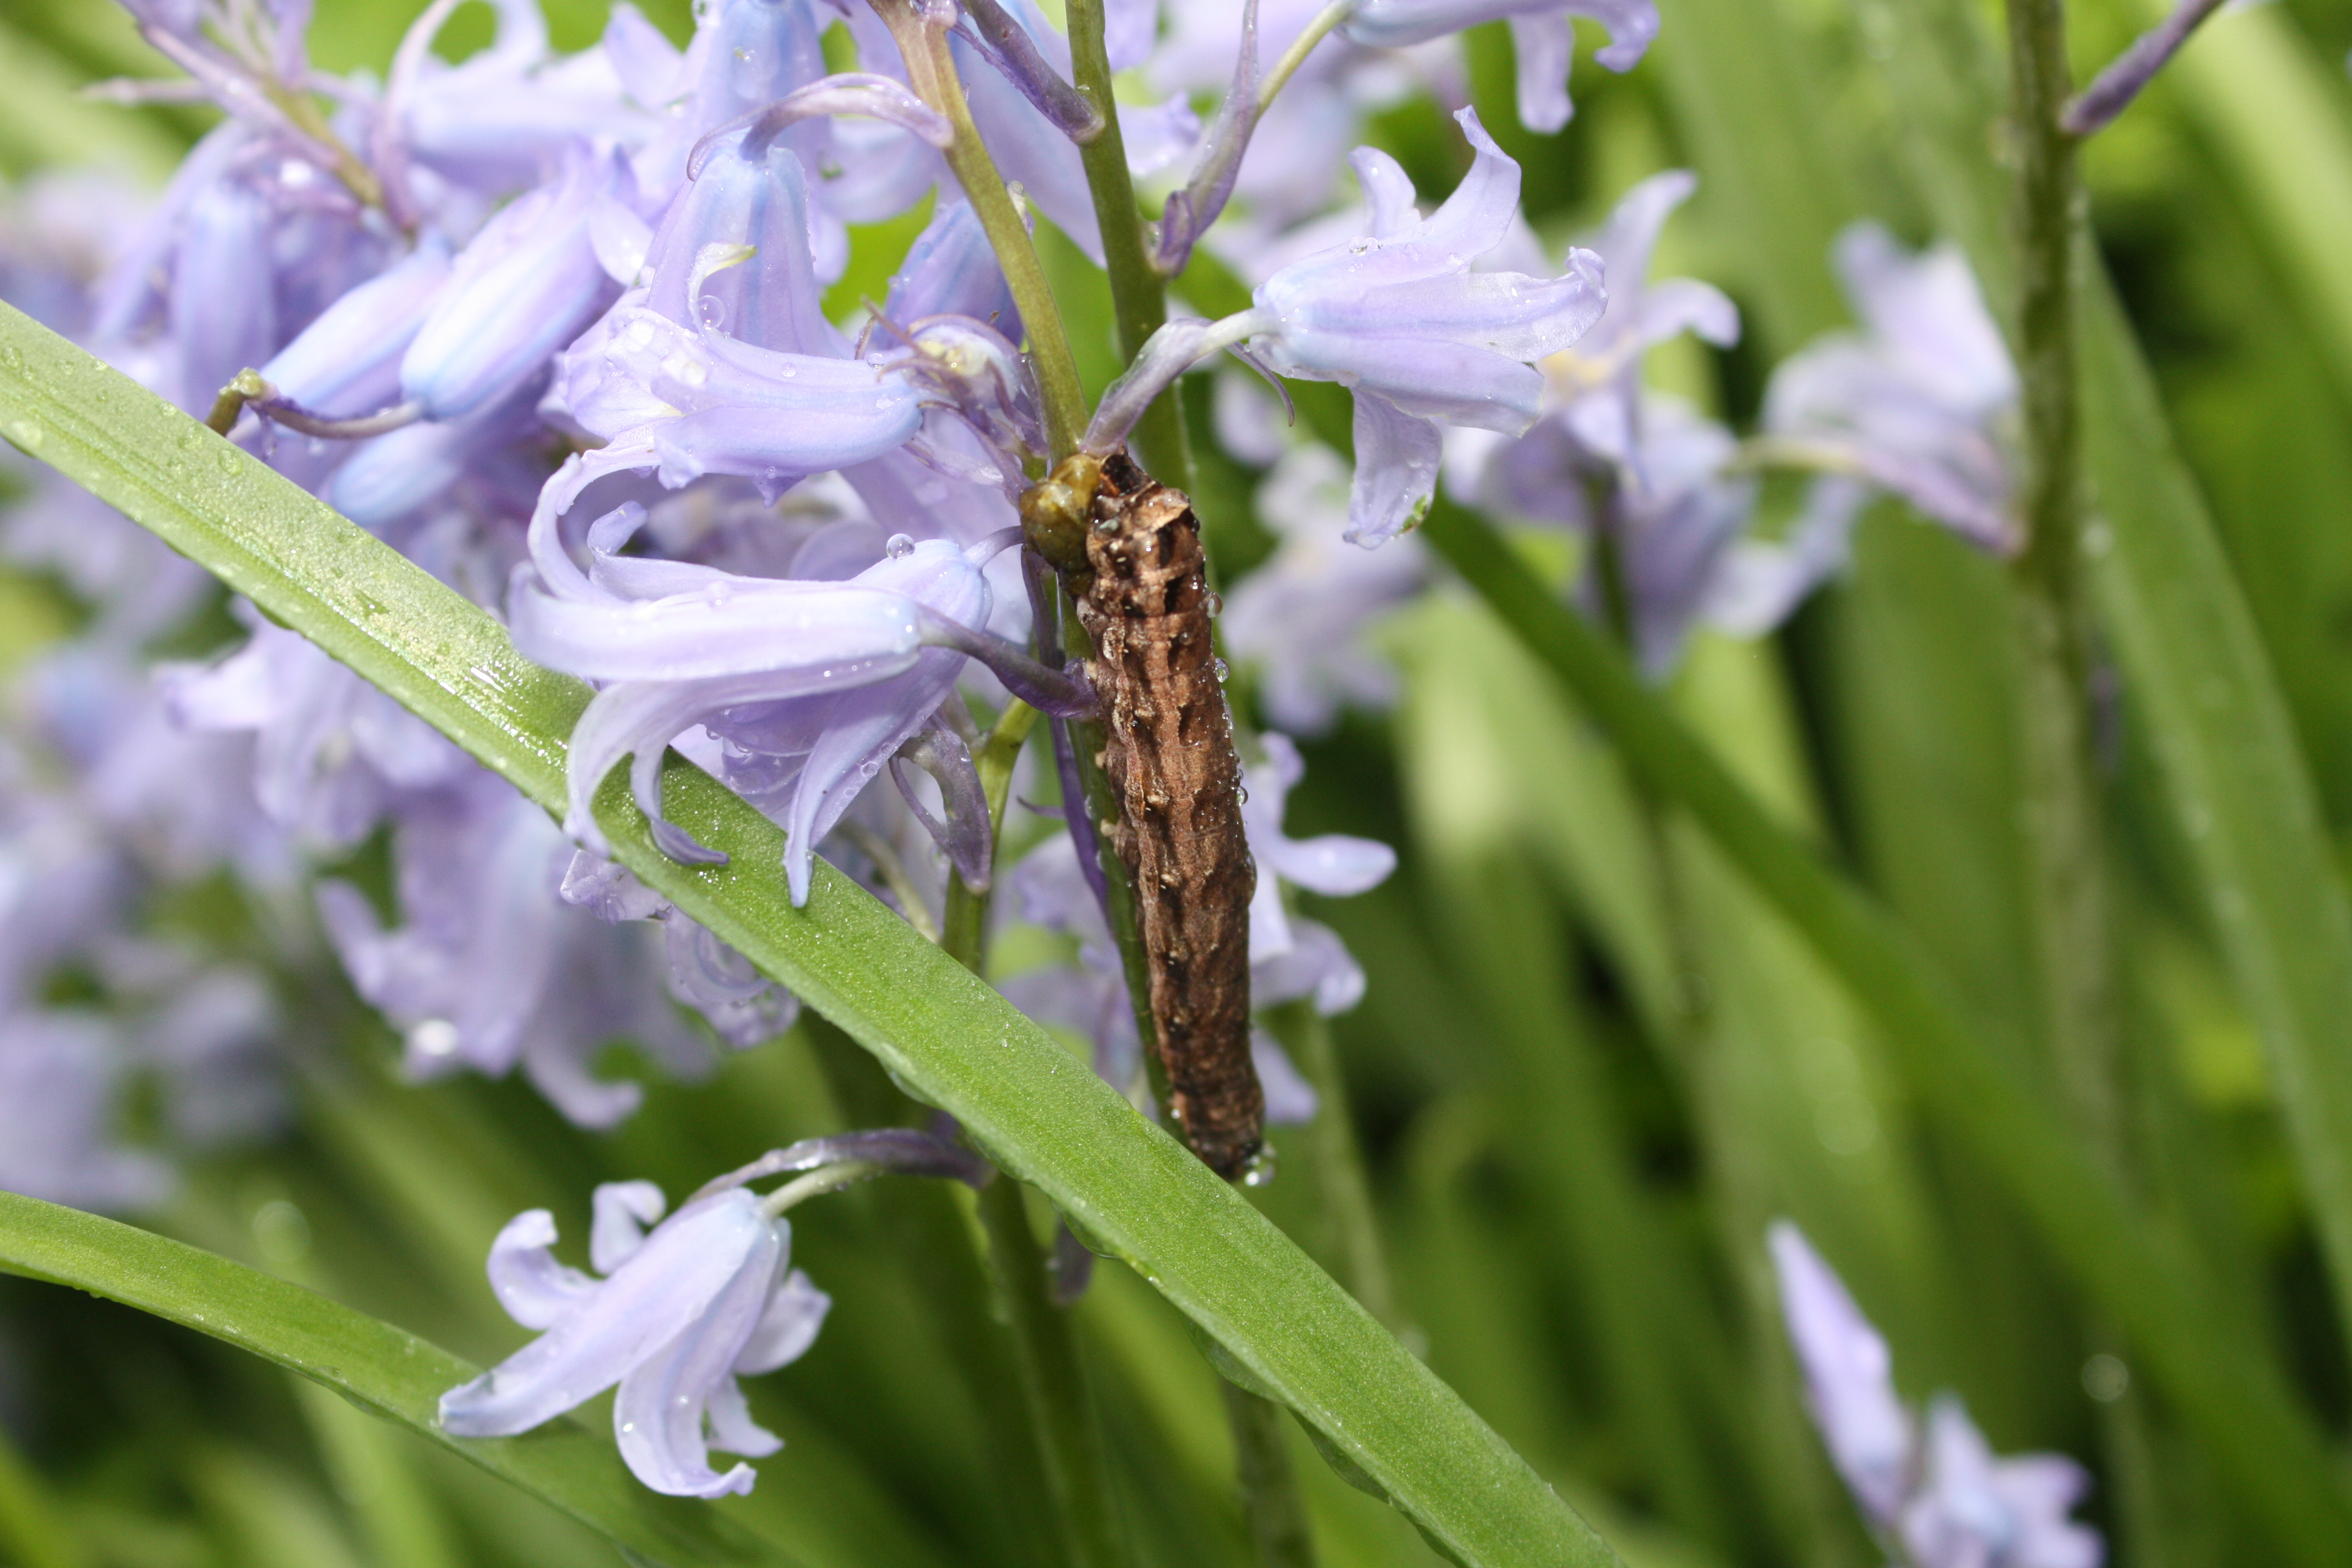 Spotted Cutworm feeds on flowers and foliage.